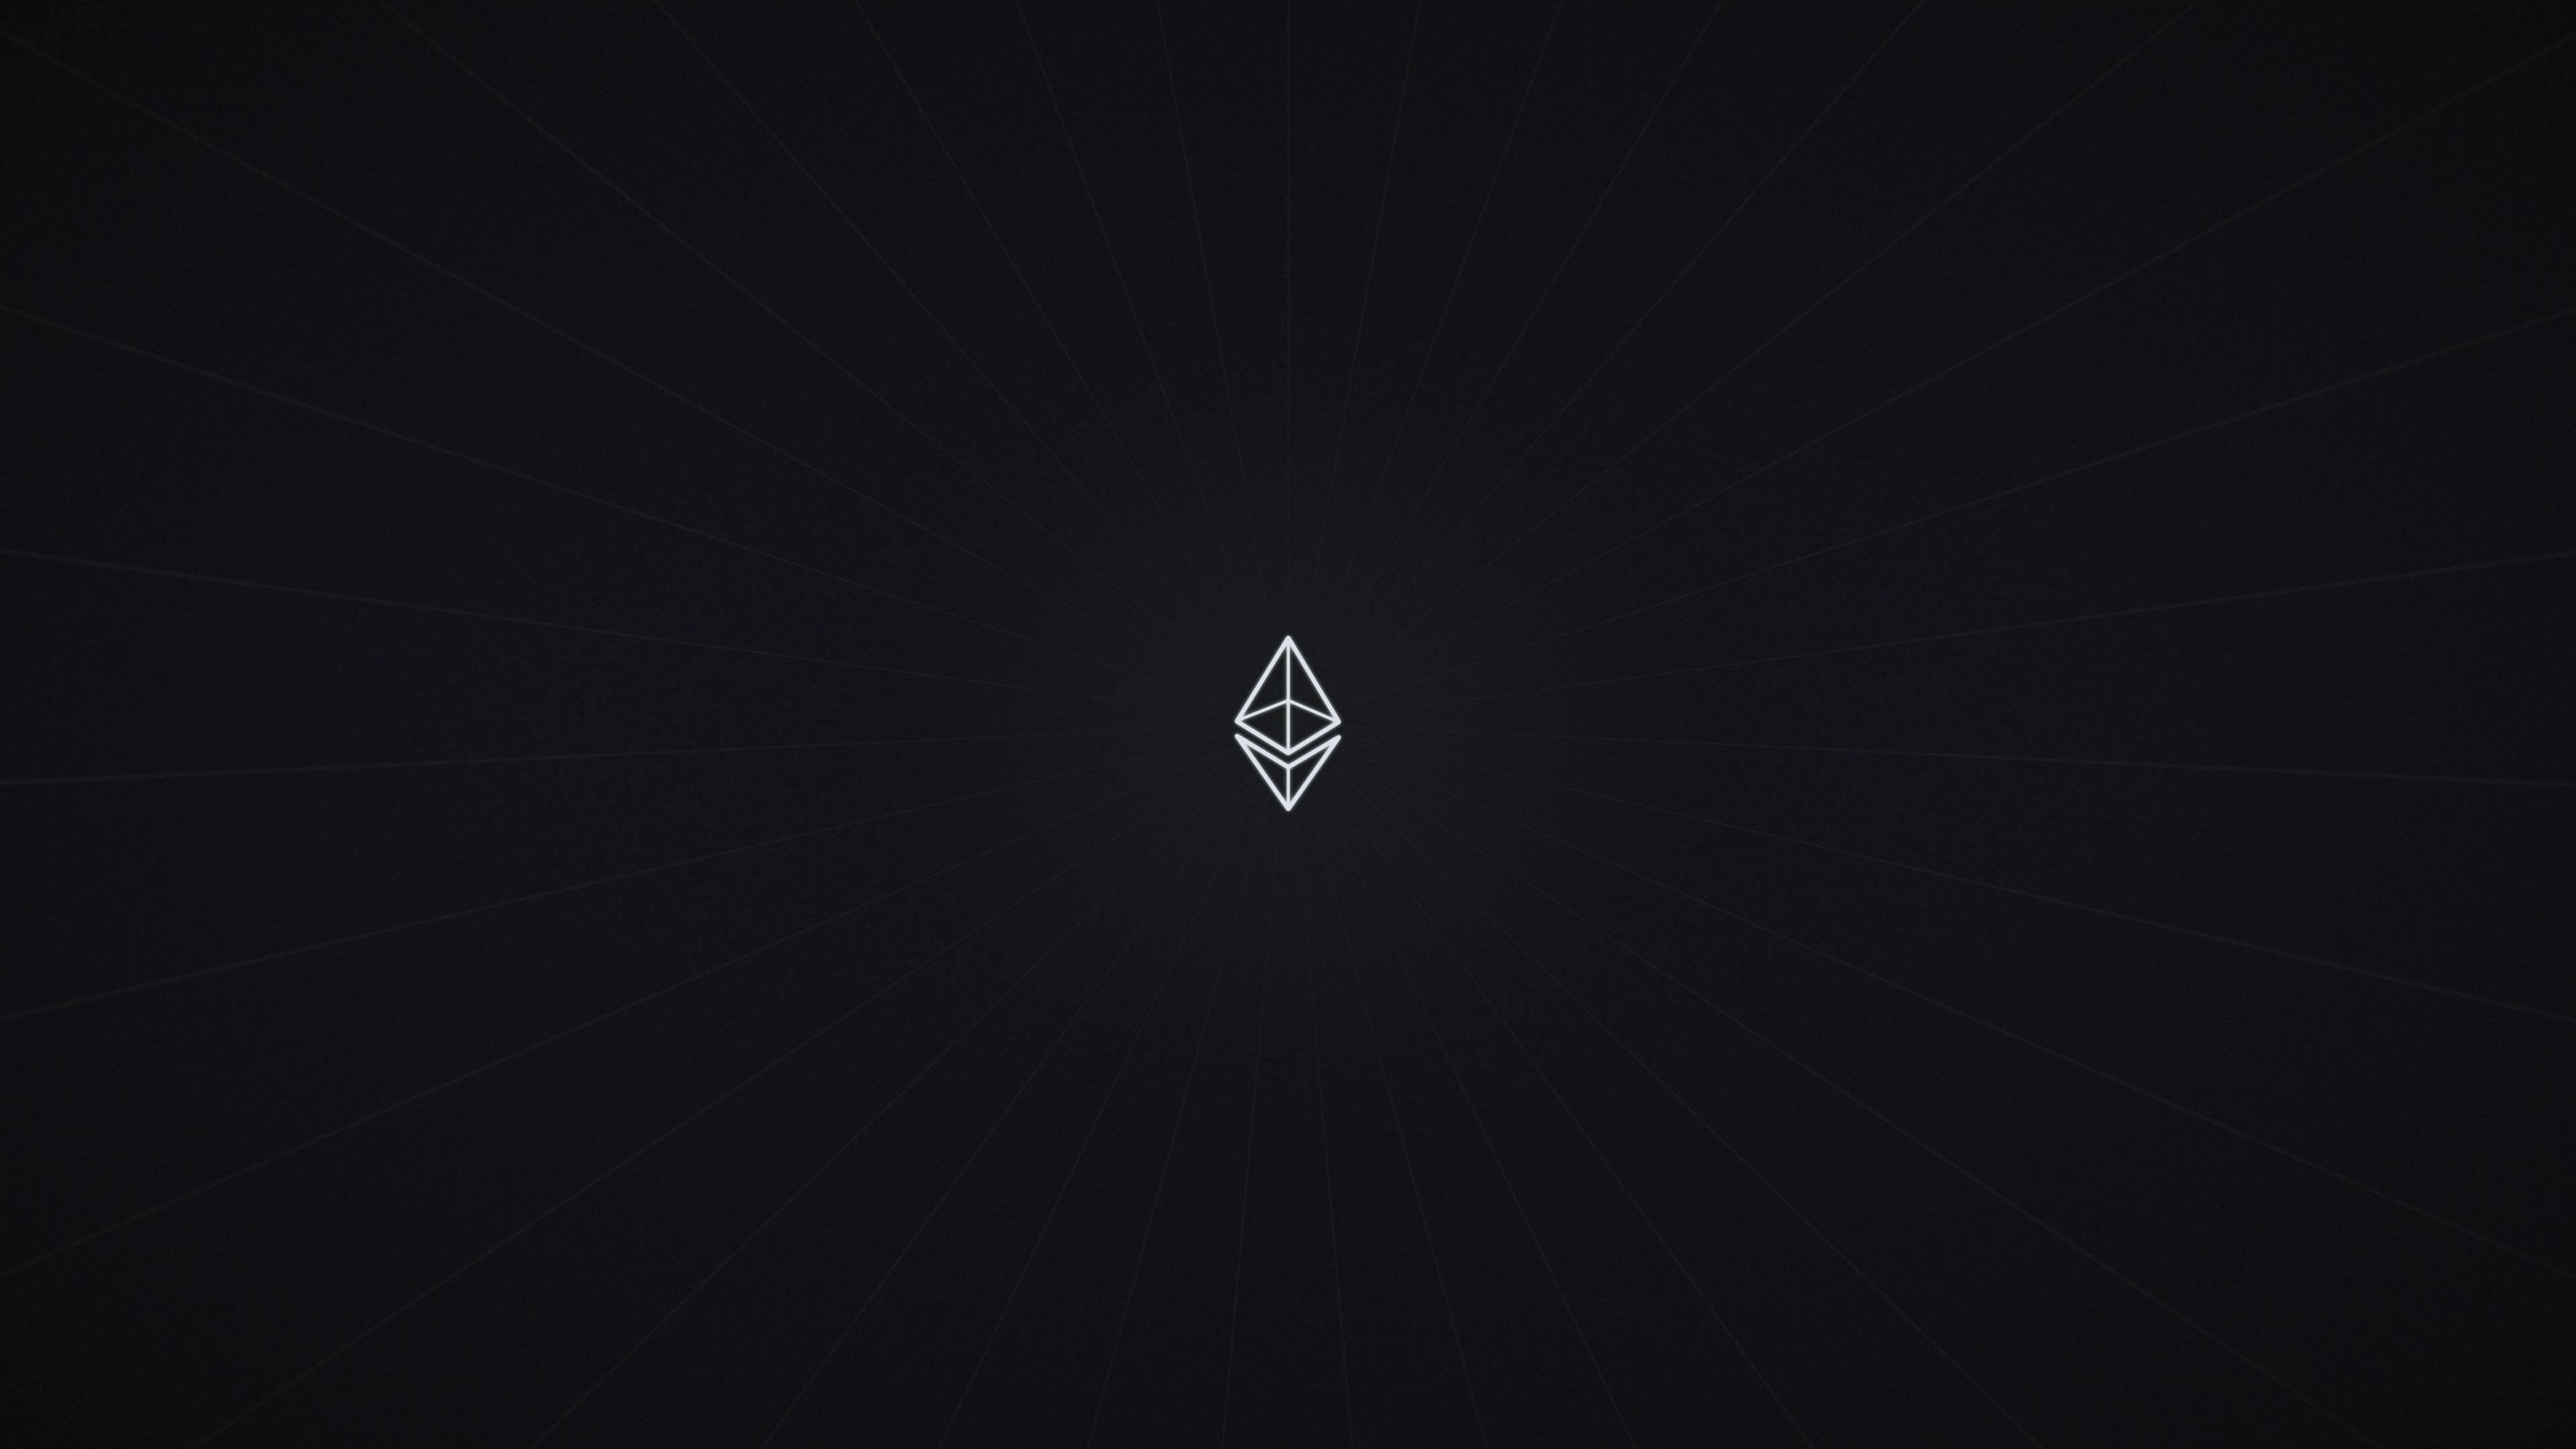 44+ Ethereum Coin Wallpaper 4K Pictures